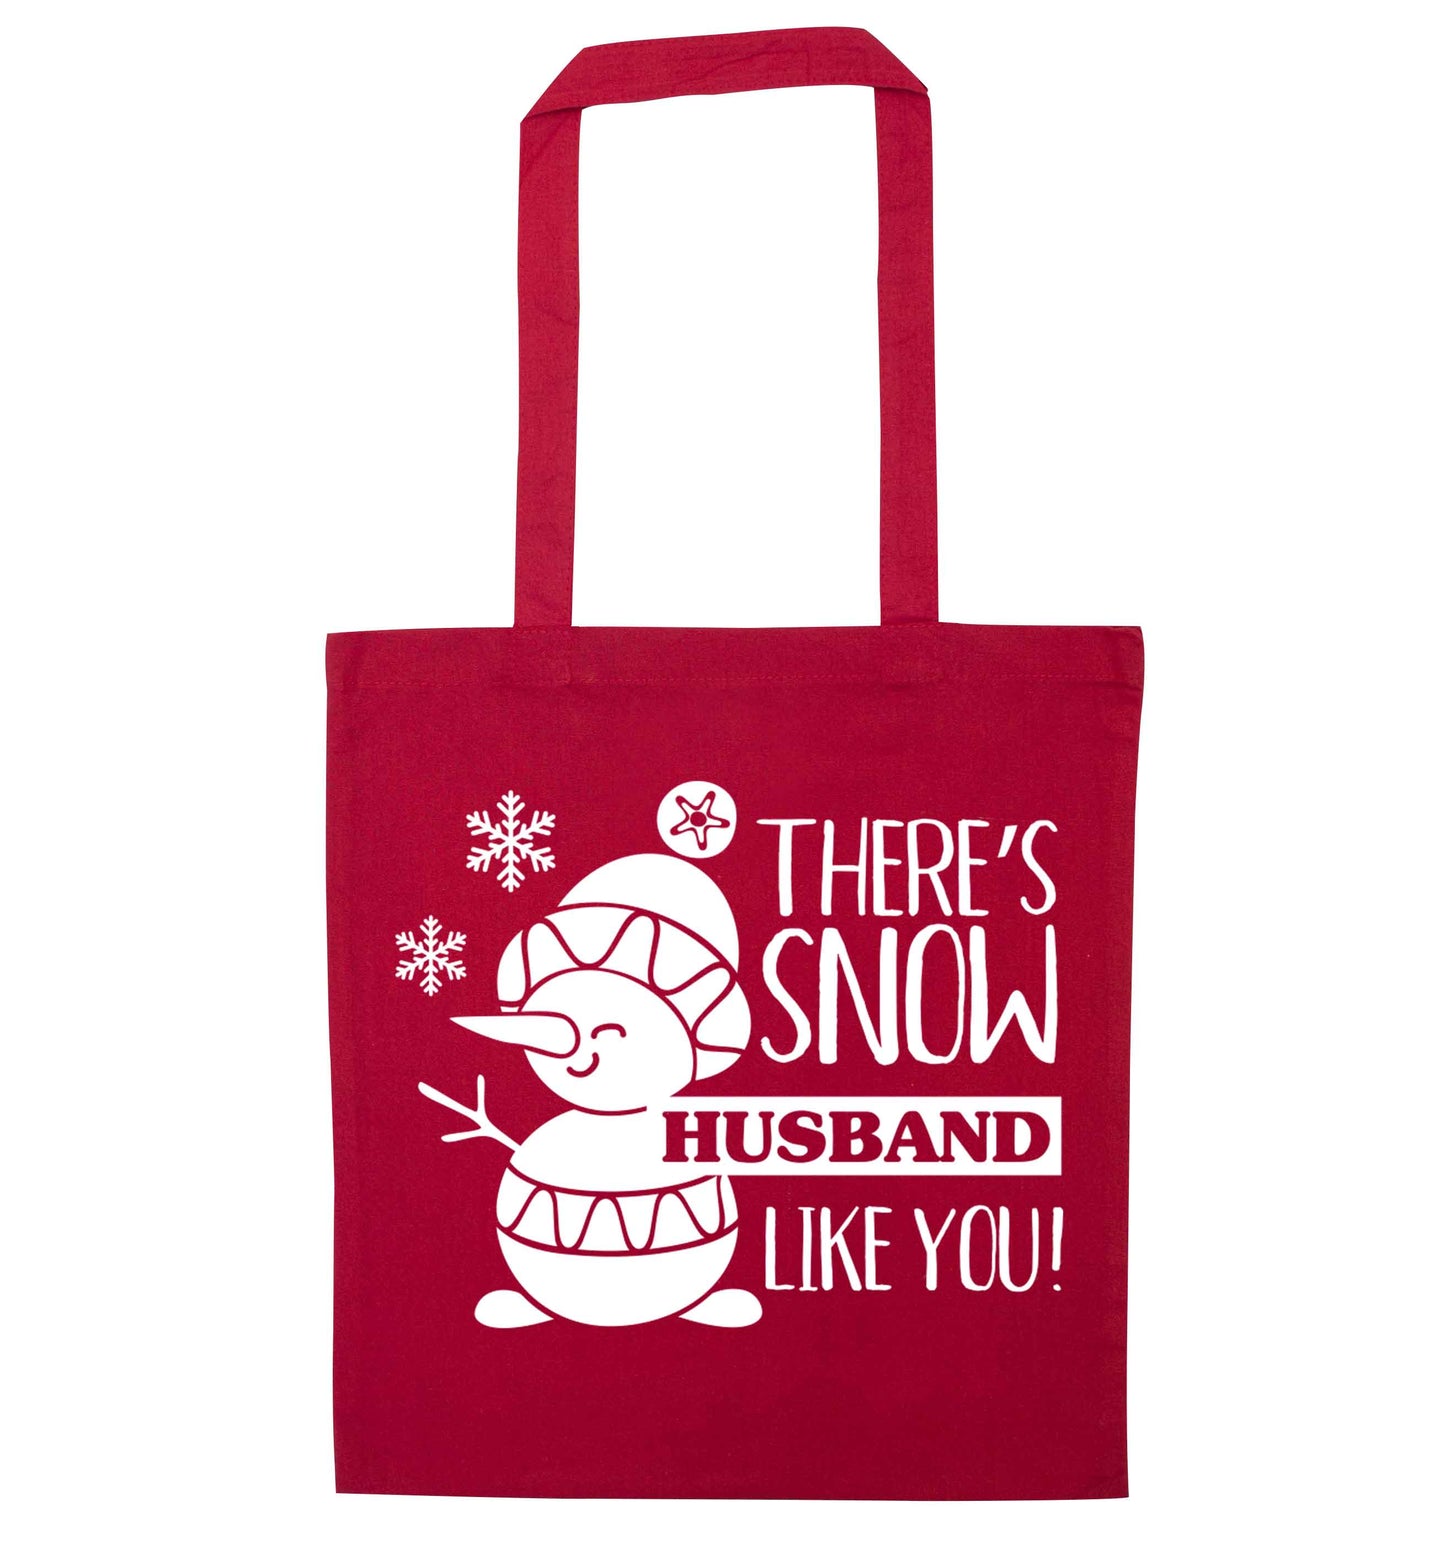 There's snow husband like you red tote bag